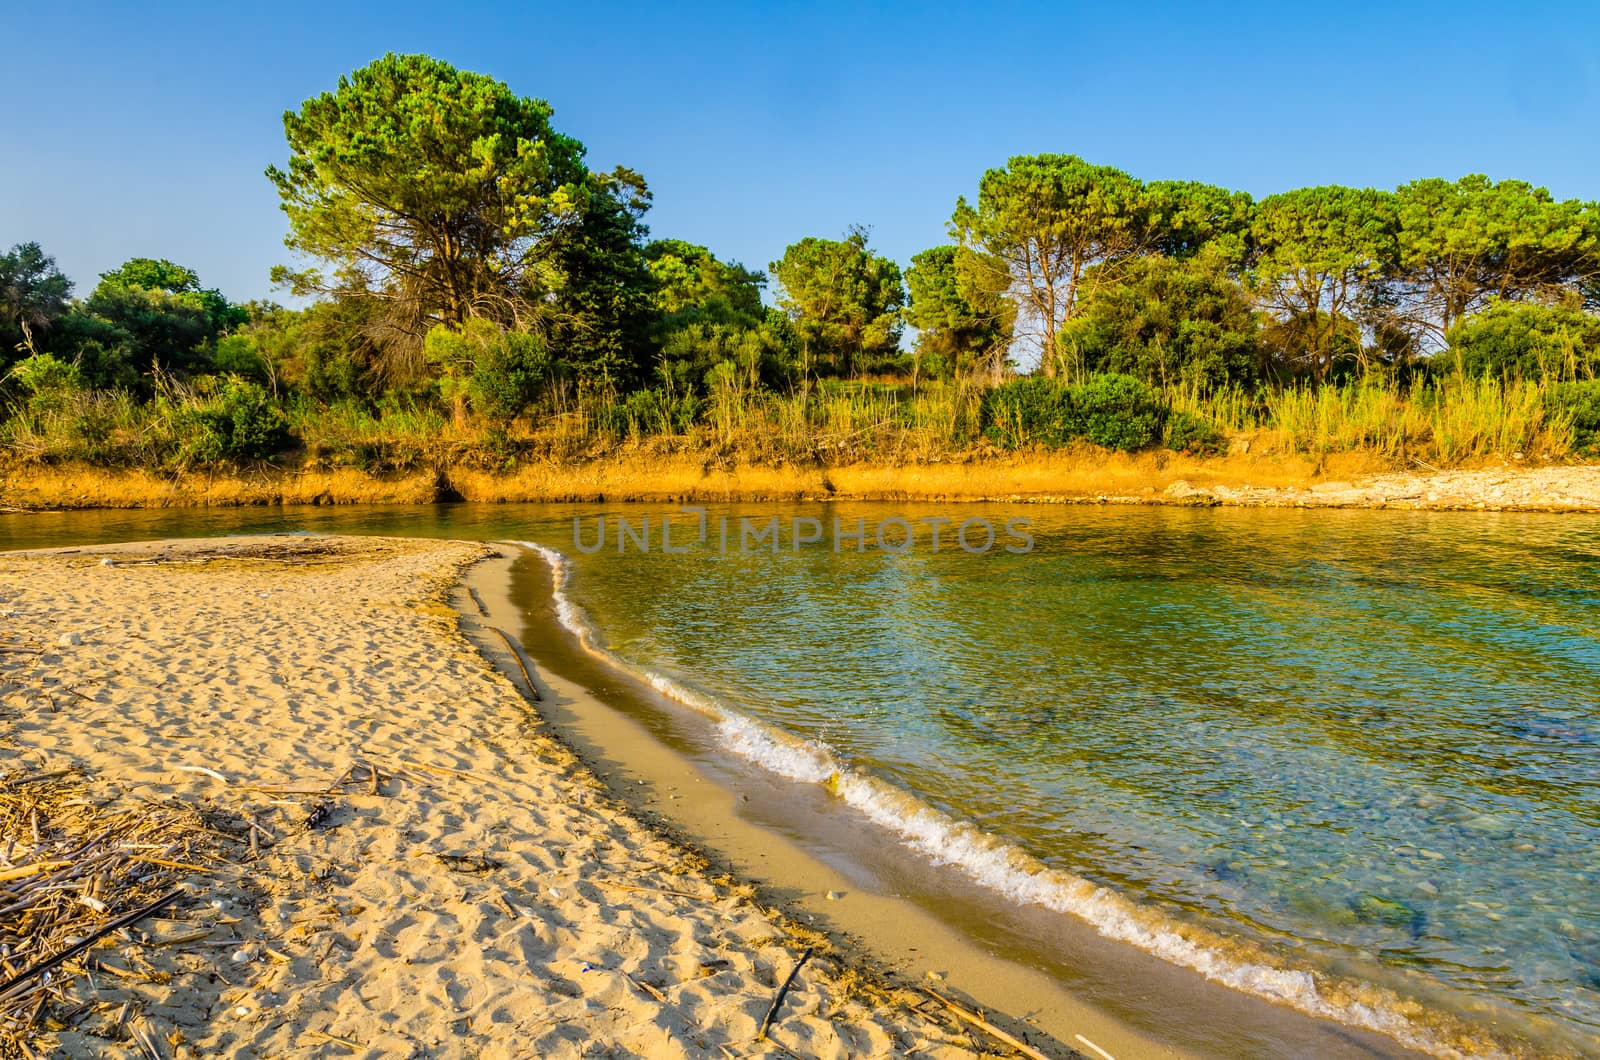 Cassibile river mouth next to Gelsomineto beach just before sunset, Sicily, Italy